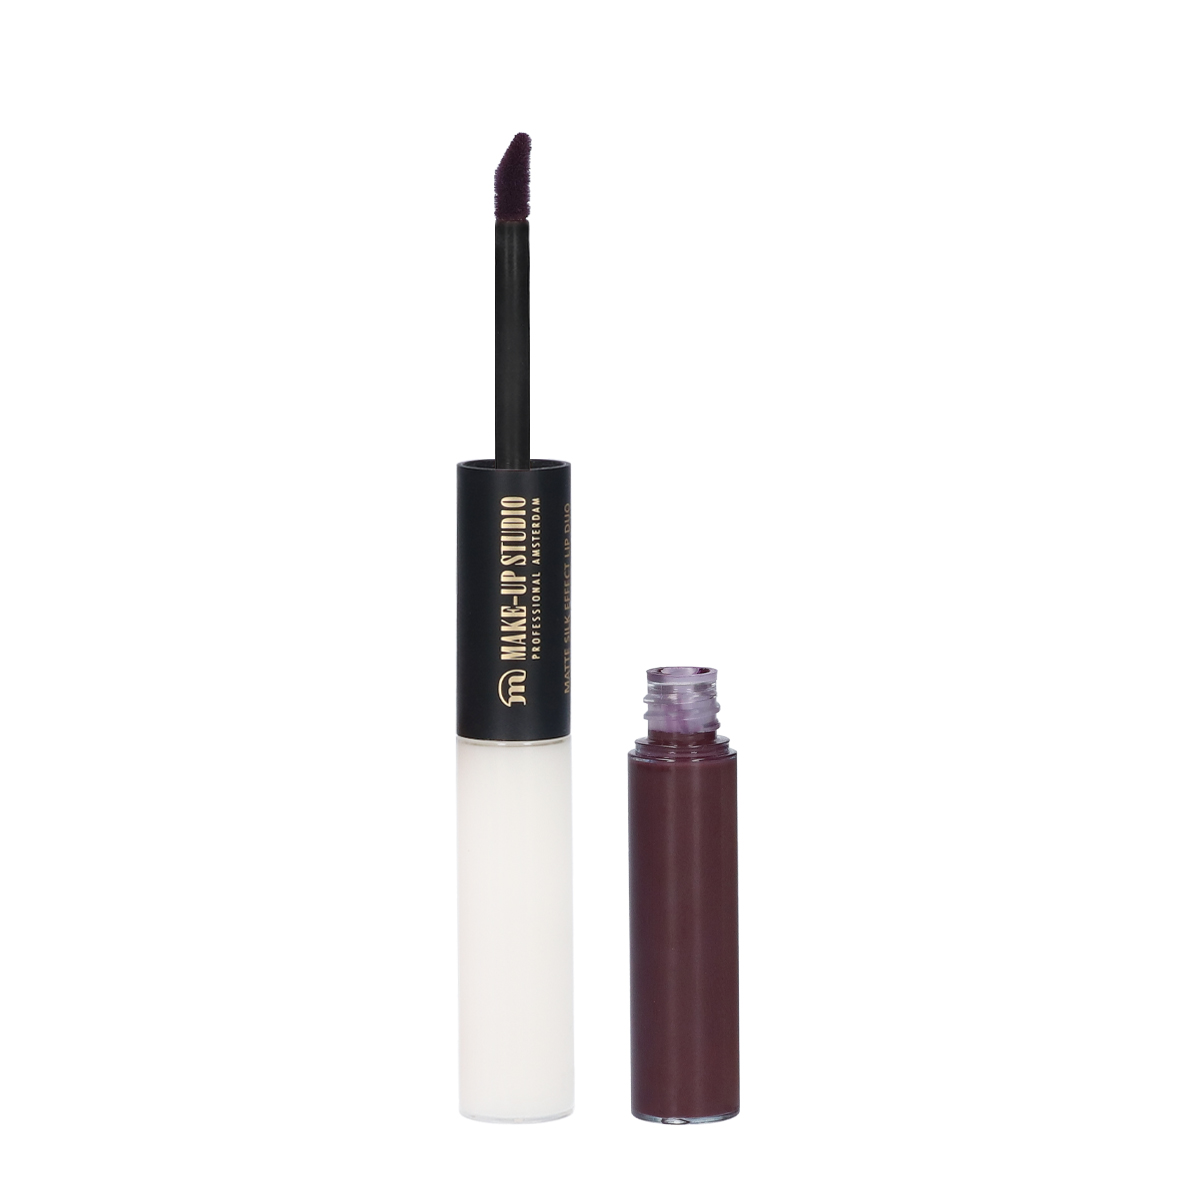 Shop all lip products from | Studio Make-up Studio Make-up Amsterdam online